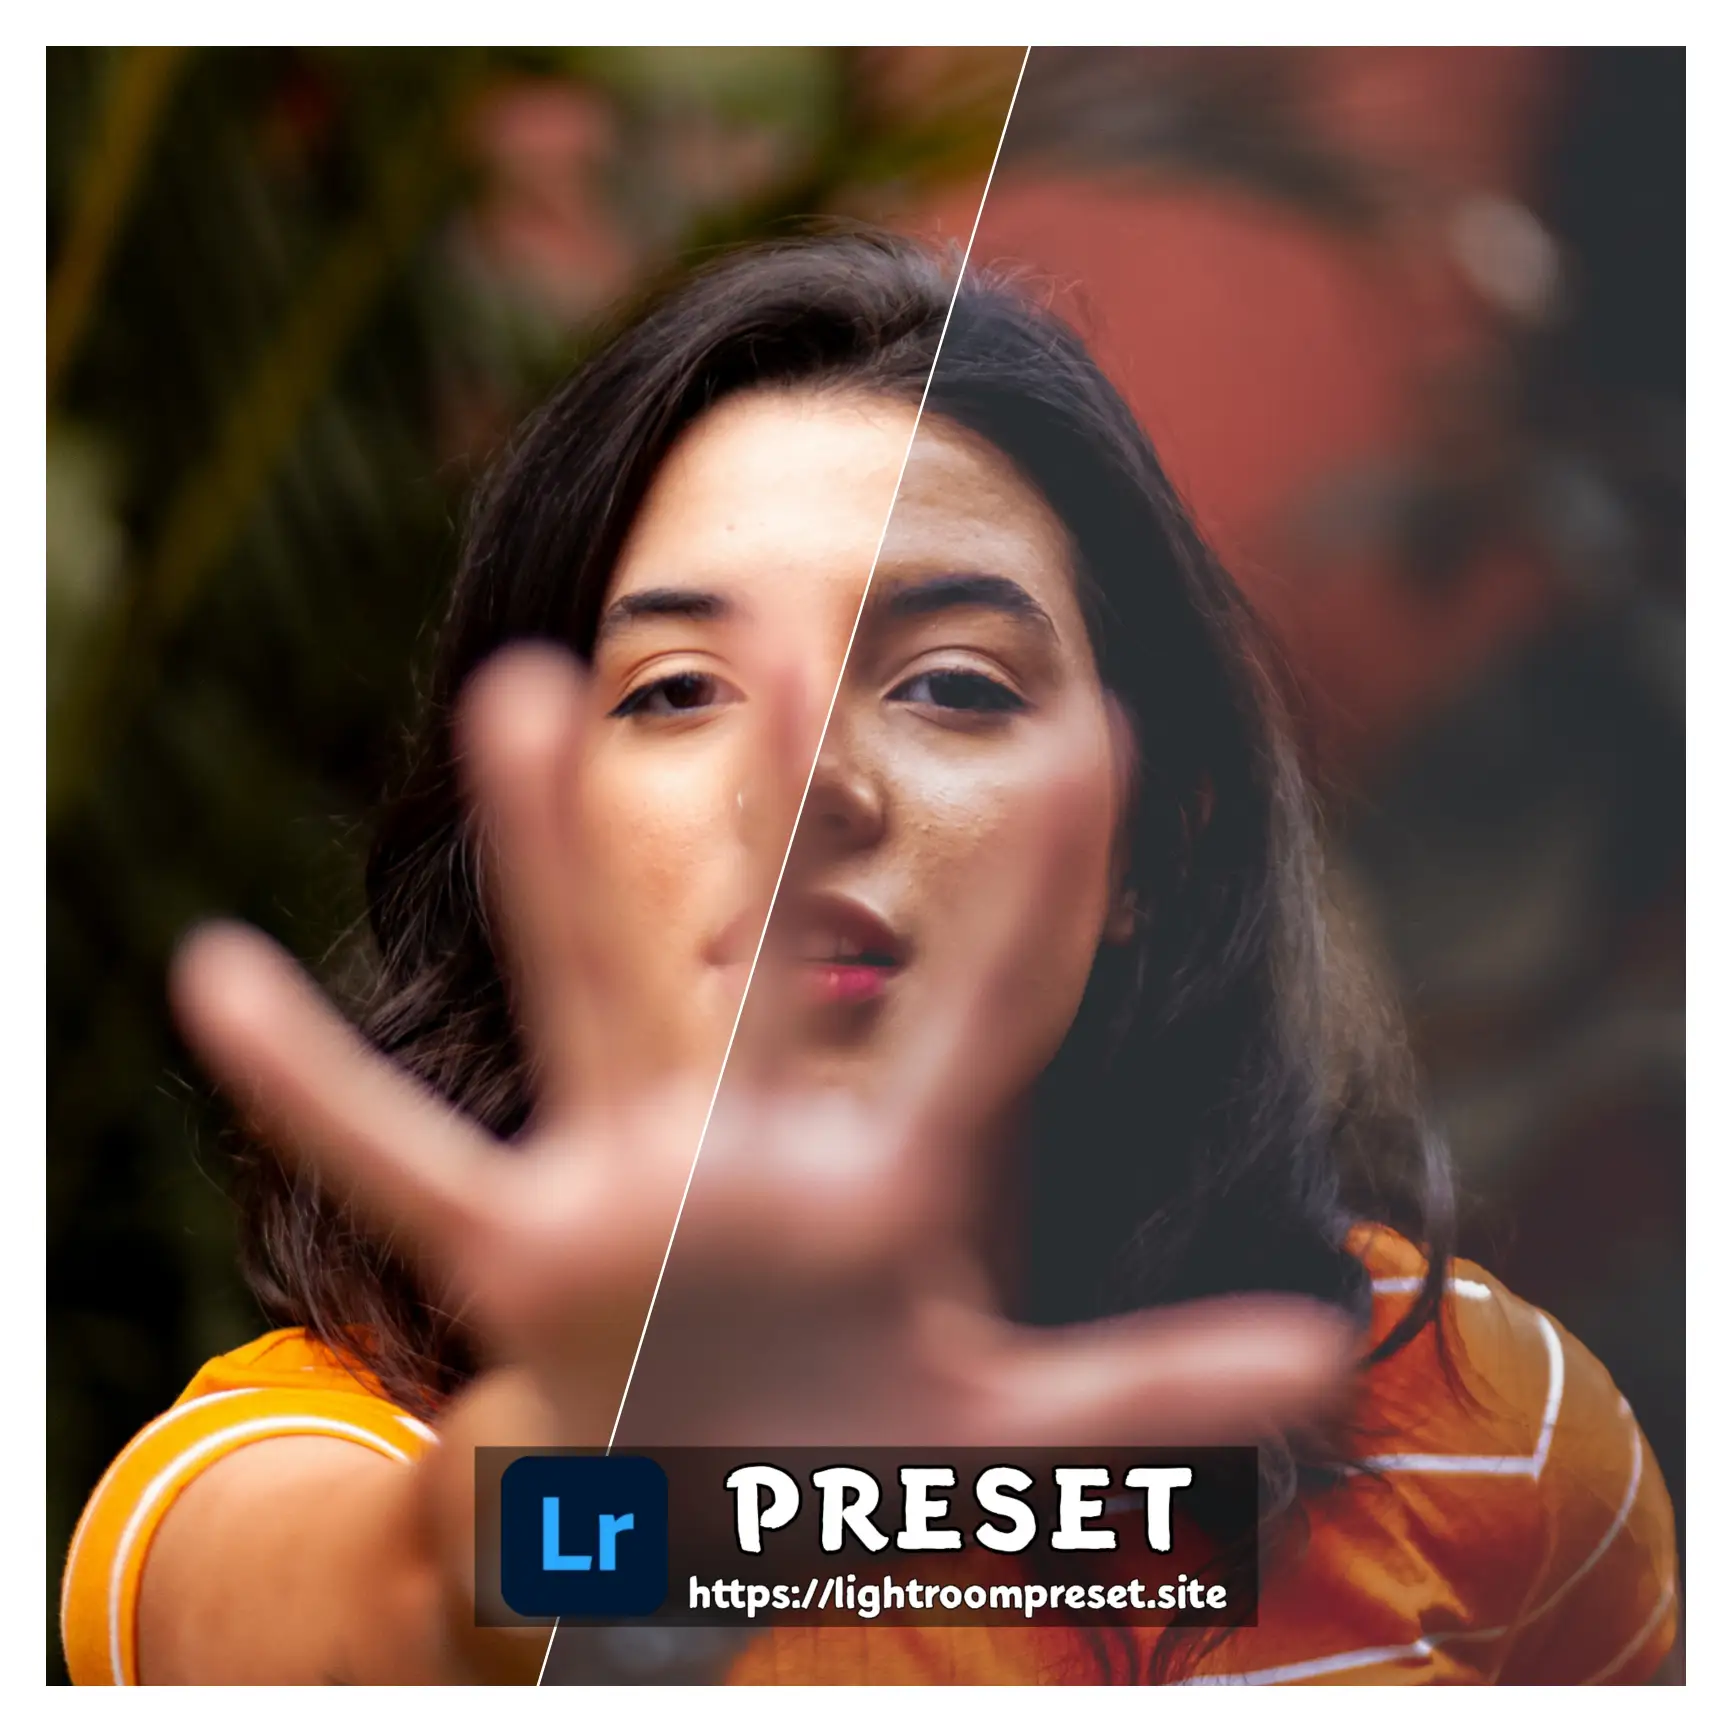 You are currently viewing Dark preset lightroom download for mobile